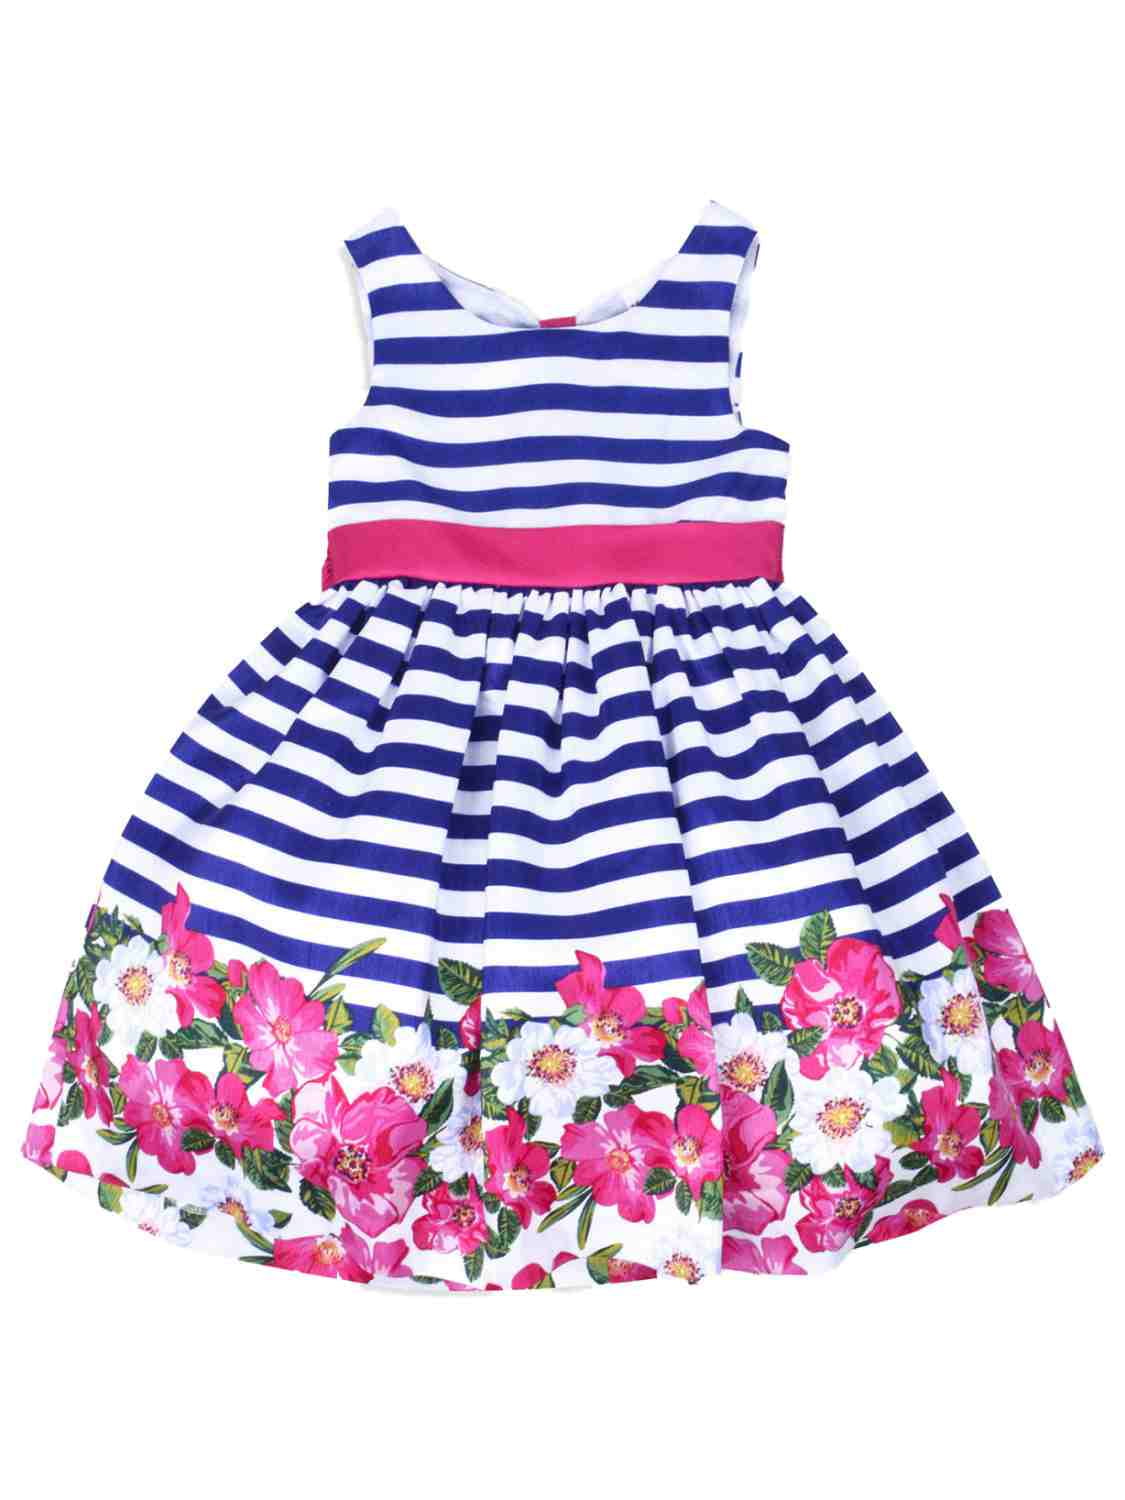 easter dress size 2t